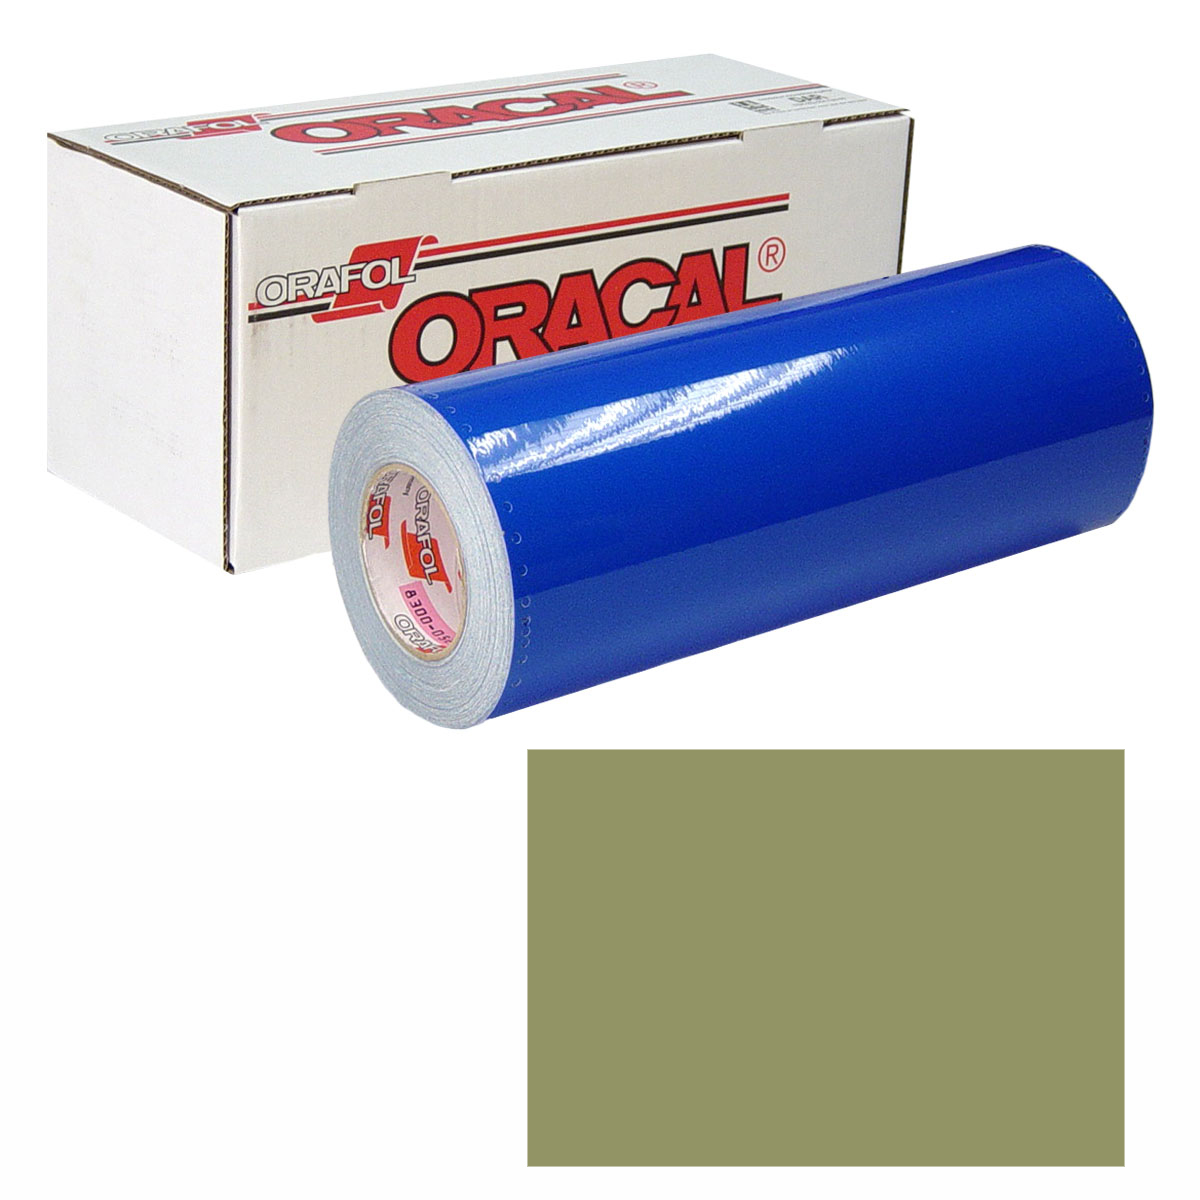 ORACAL 631 15in X 10yd 493 Olive